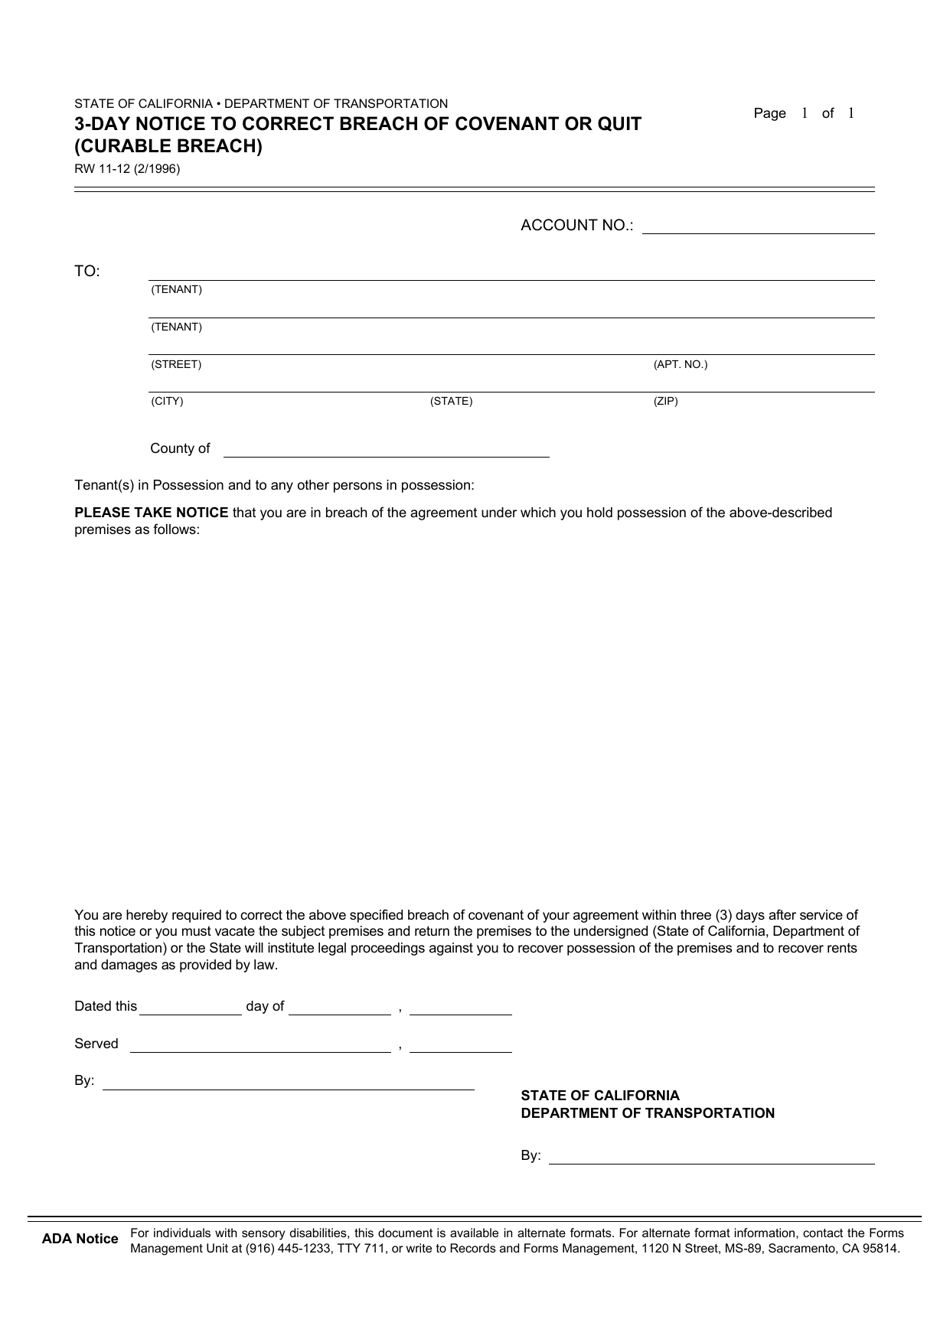 Form RW11-12 3-day Notice to Correct Breach of Covenant or Quit (Curable Breach) - California, Page 1